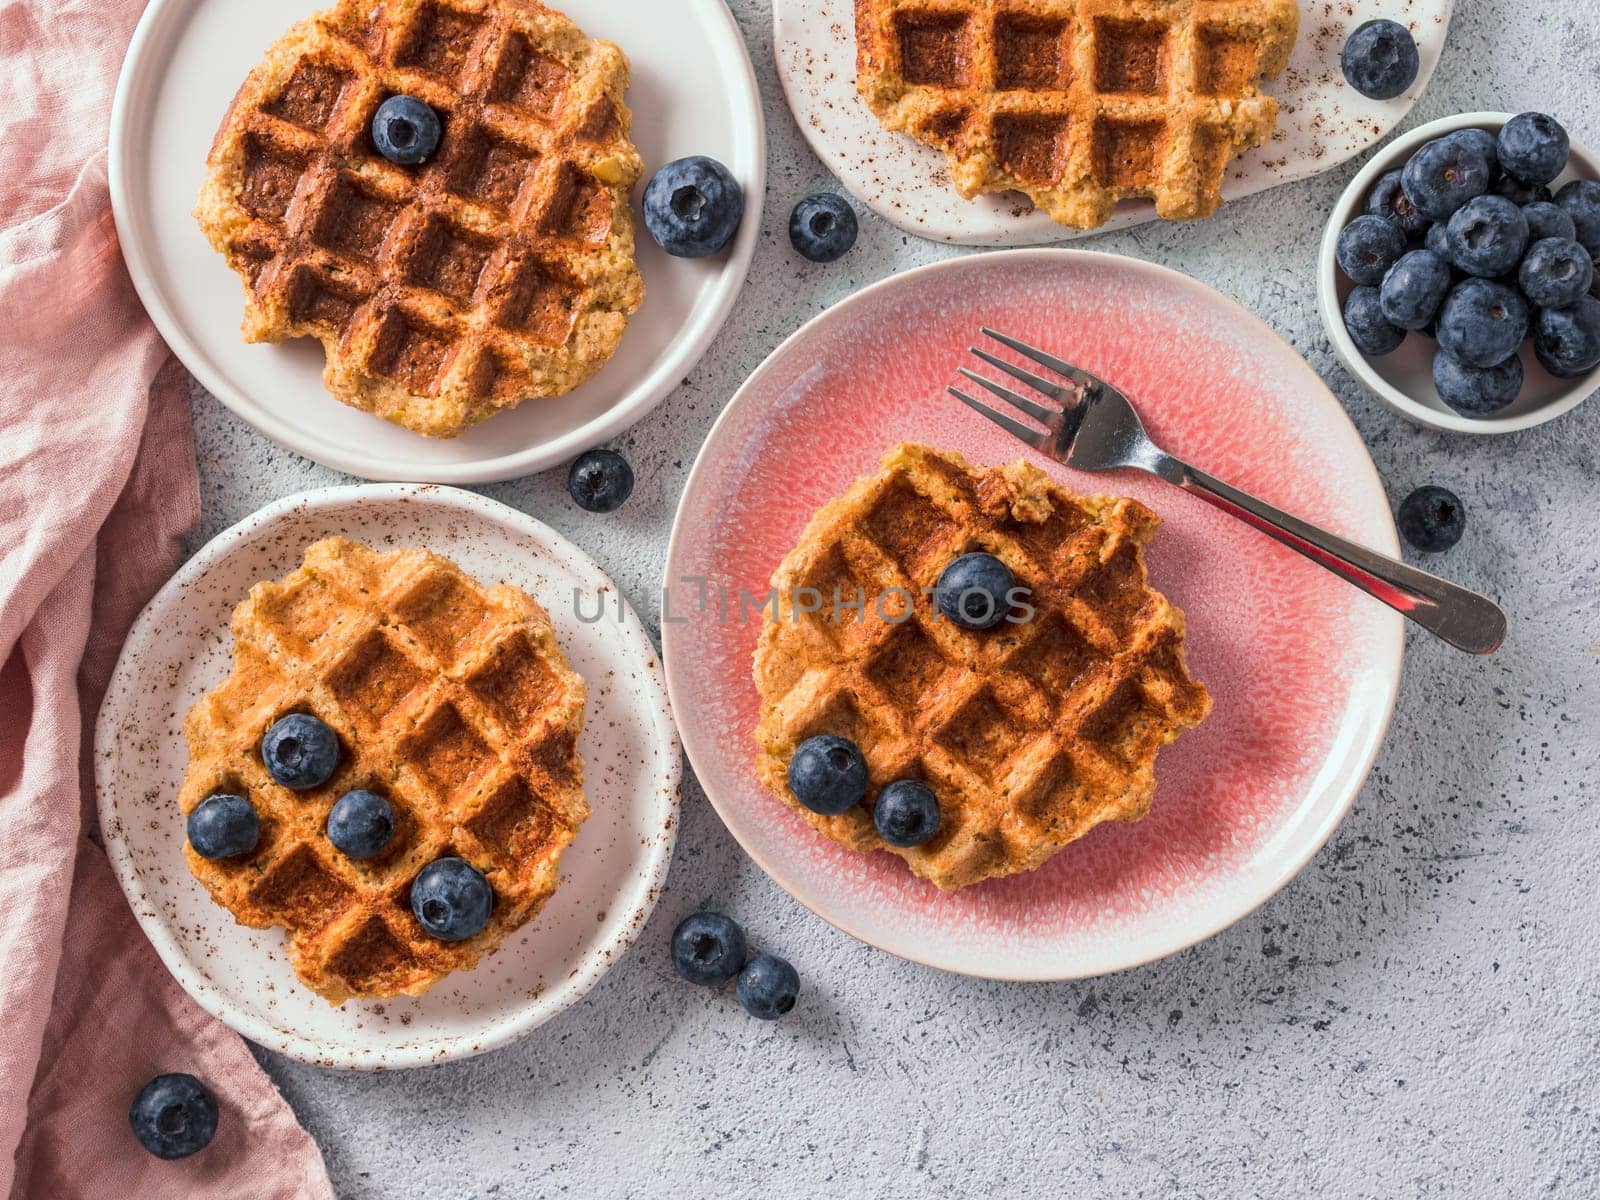 Easy healthy gluten free oat waffles with copy space. Plates with appetizing homemade waffles with oat flour decorated blueberries, on light gray cement background. Top down view or flat lay